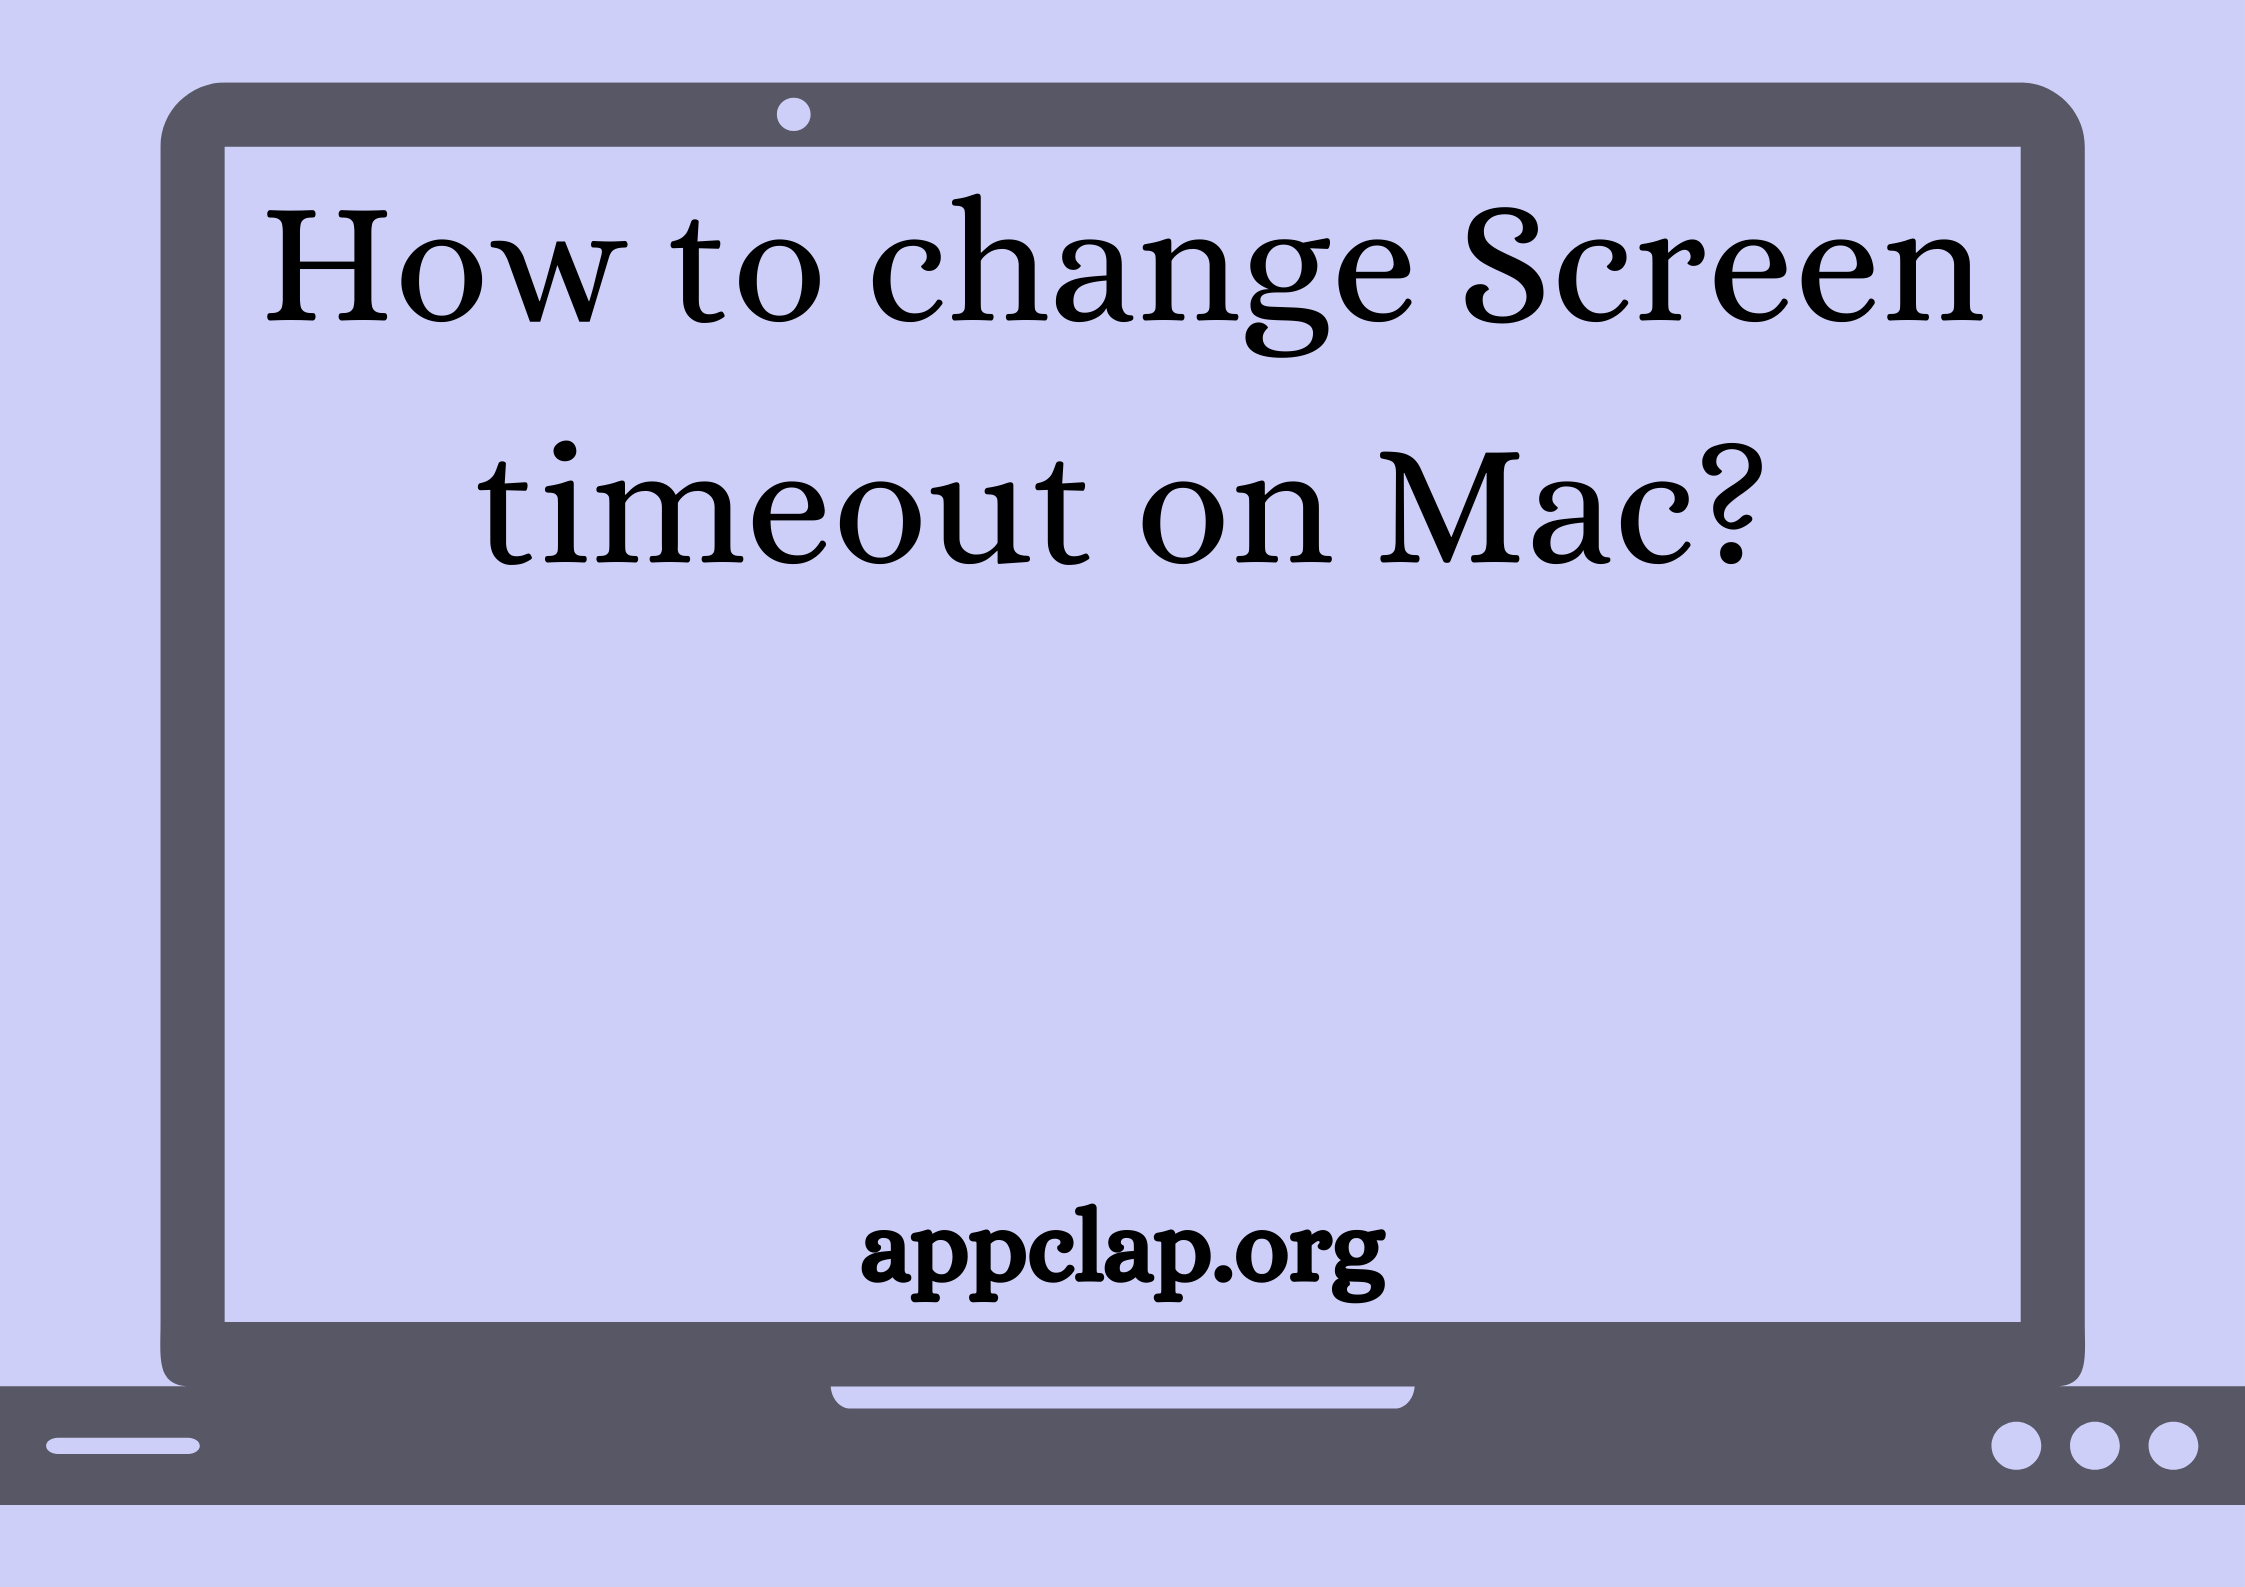 How to change Screen timeout on Mac?